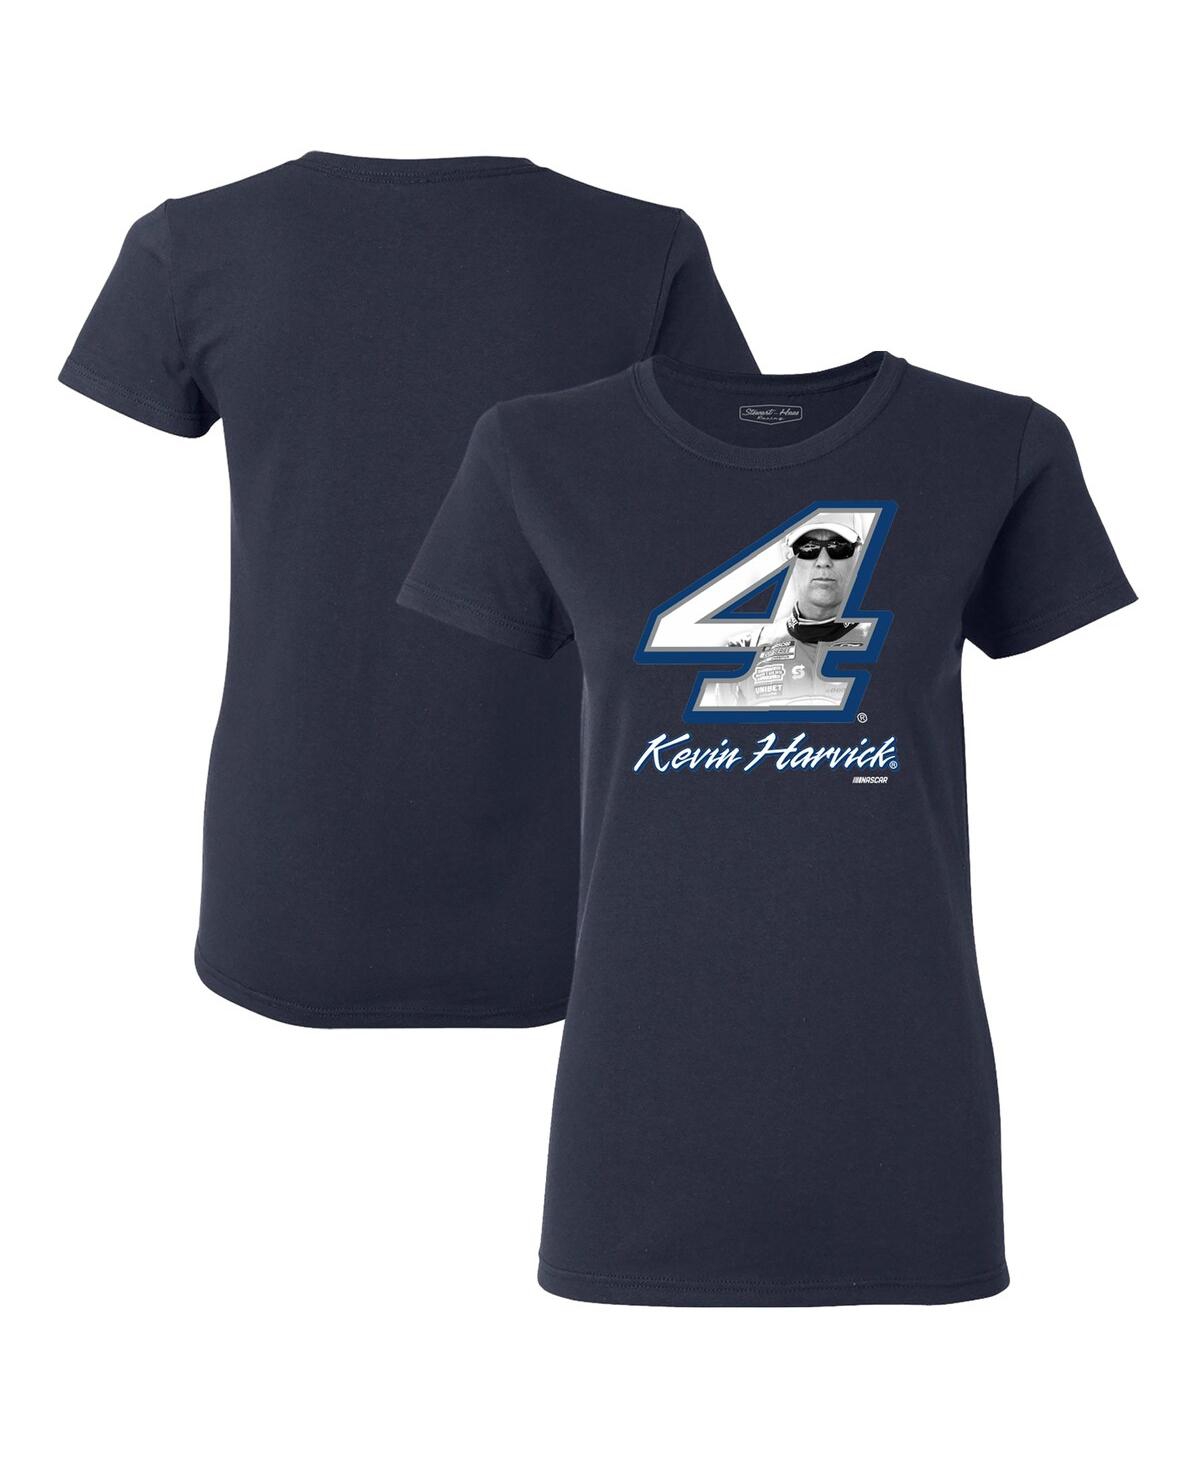 Stewart-haas Racing Team Collection Women's  Navy Kevin Harvick Driver T-shirt